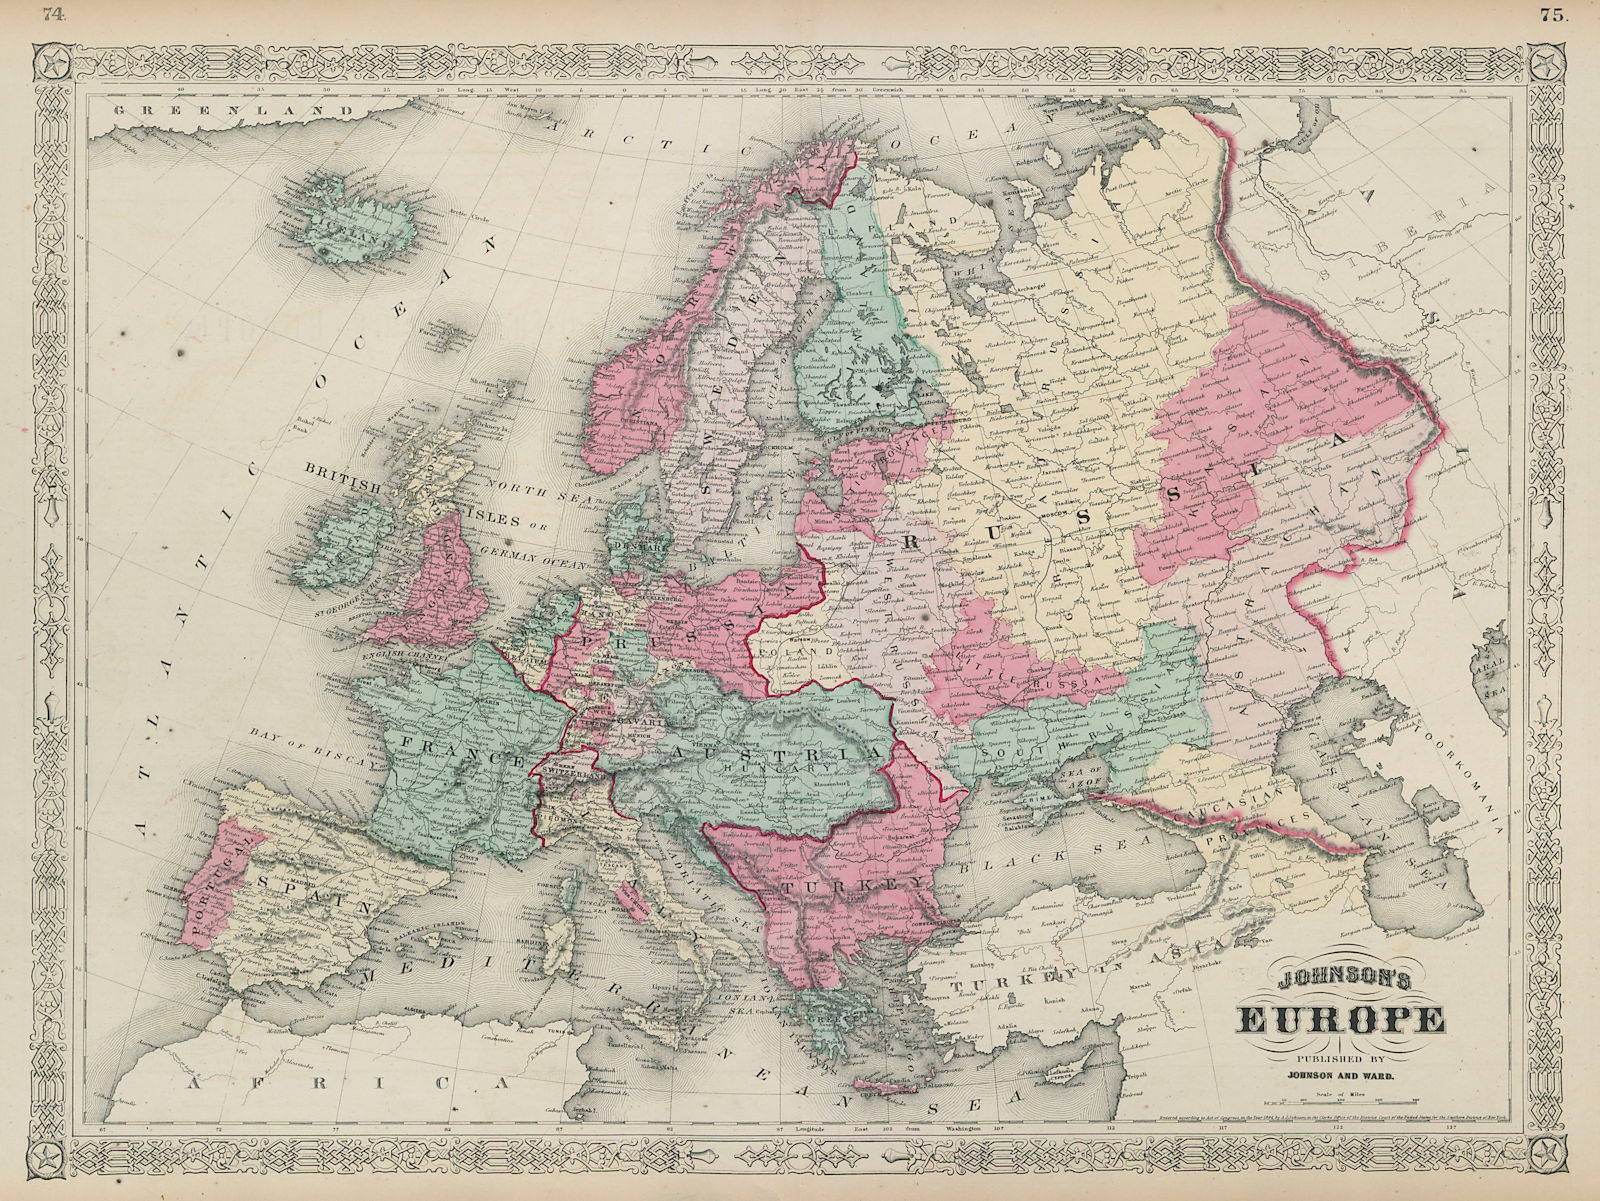 Associate Product Johnson's Europe. Austria Hungary Prussia Turkey Papal States 1865 old map